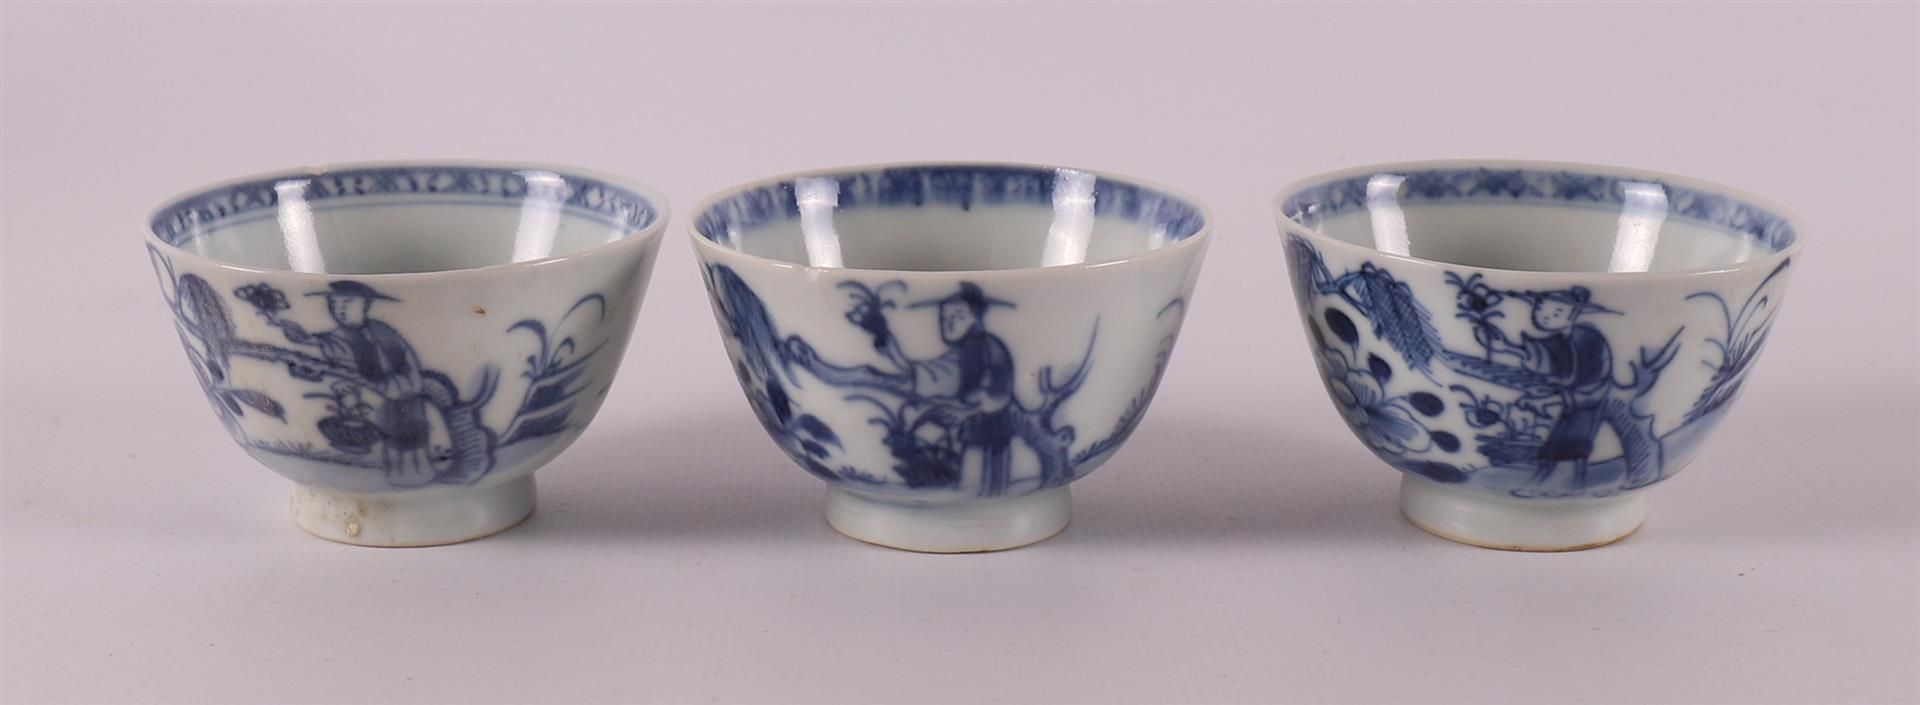 Six blue/white porcelain cups and four saucers, China, Qianlong, 18th century. - Image 14 of 21